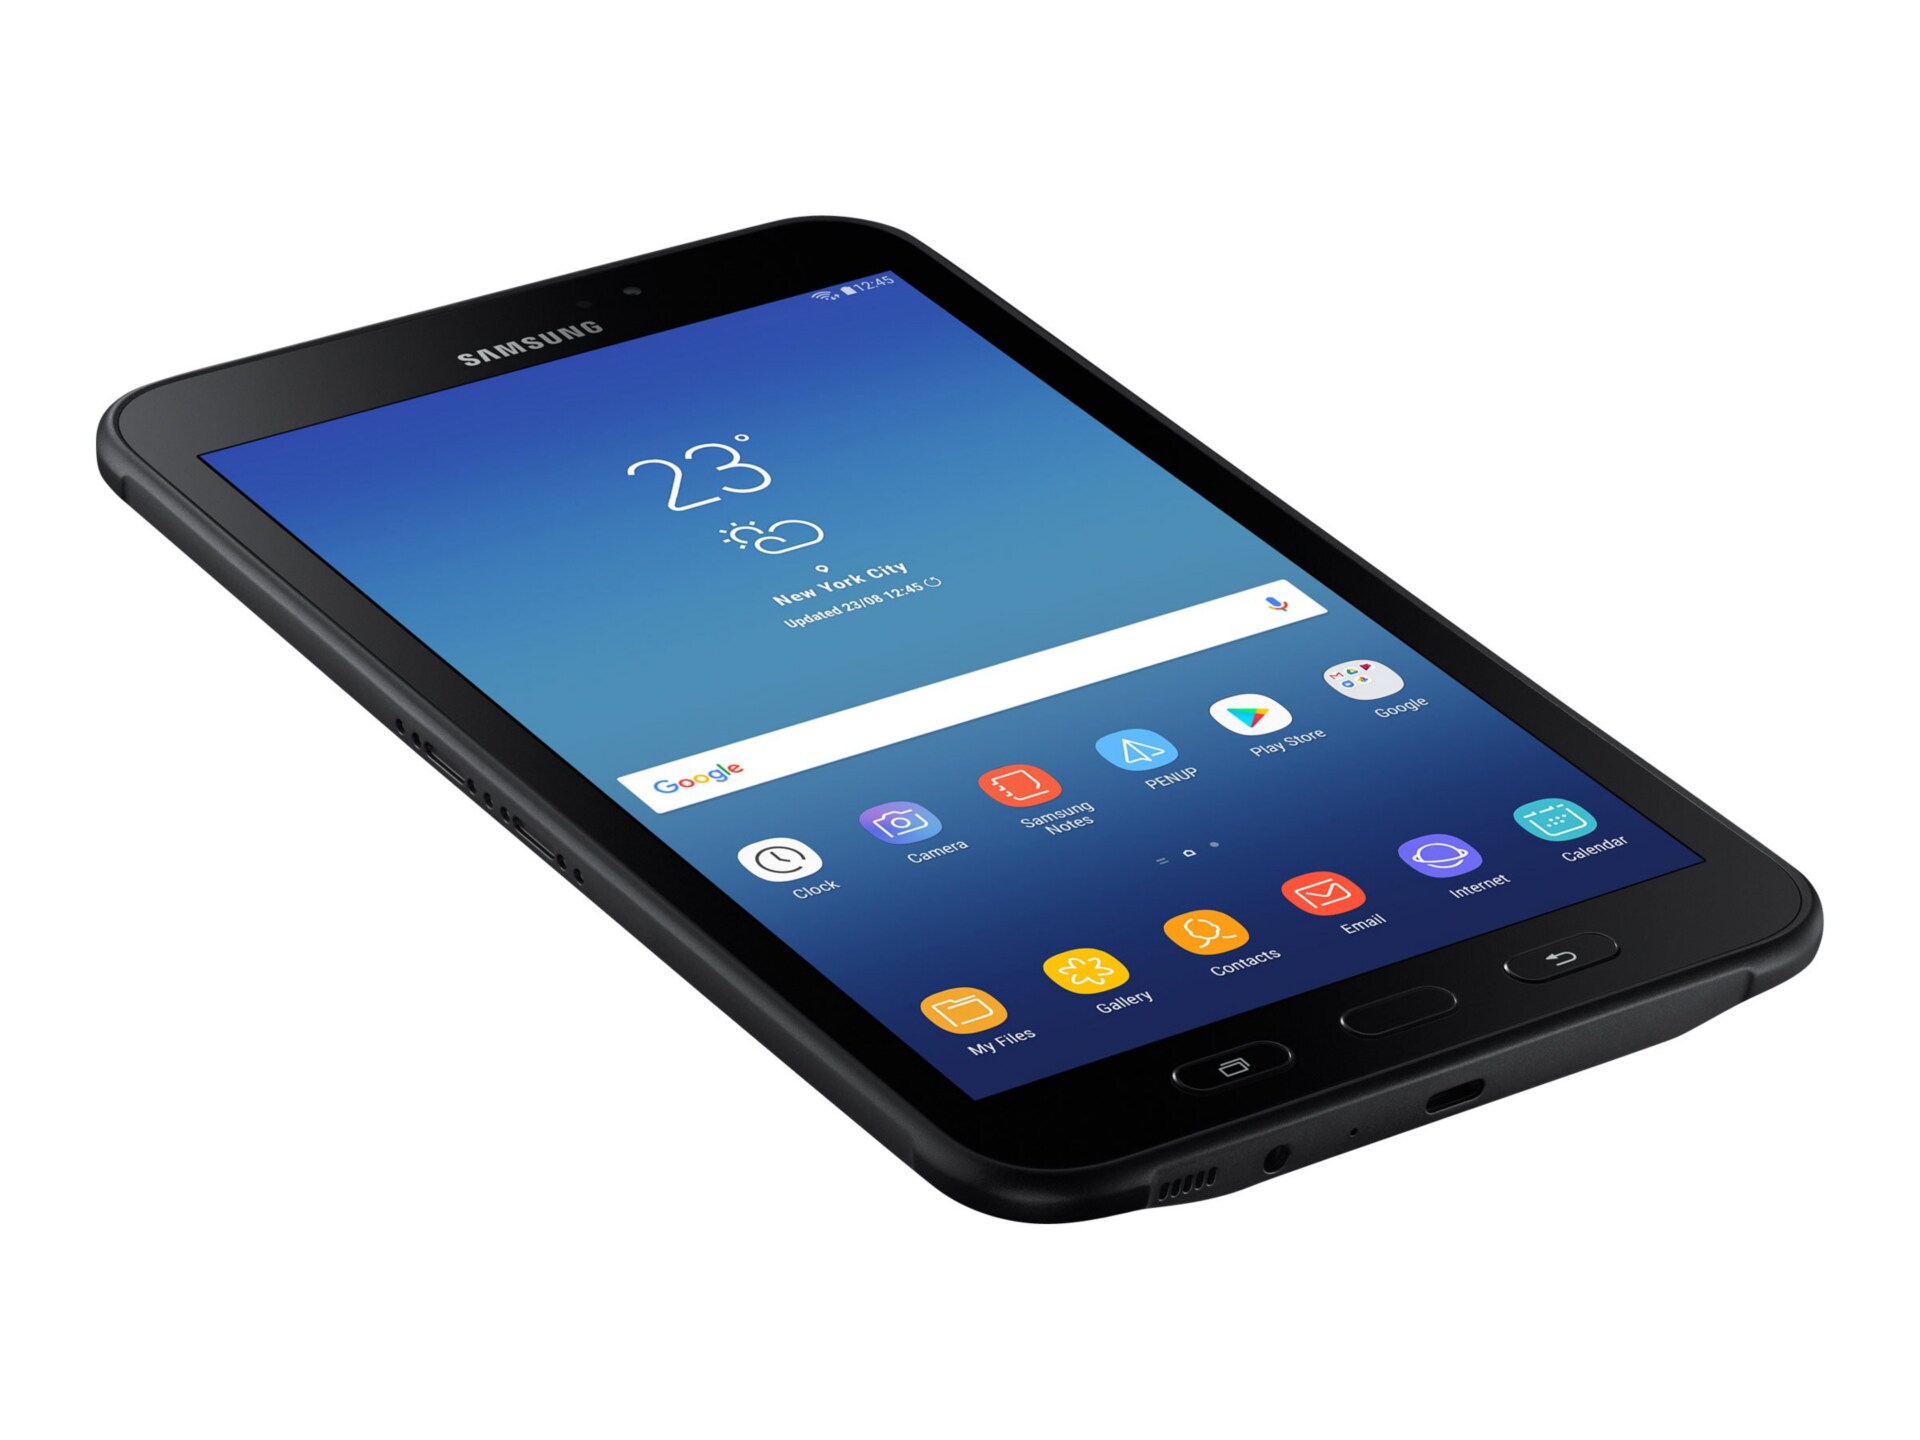 Samsung Galaxy Tab Active2 - tablet Android 7.1 (Nougat) - 16 GB - 8" - SM-T390NZKAXAR - -